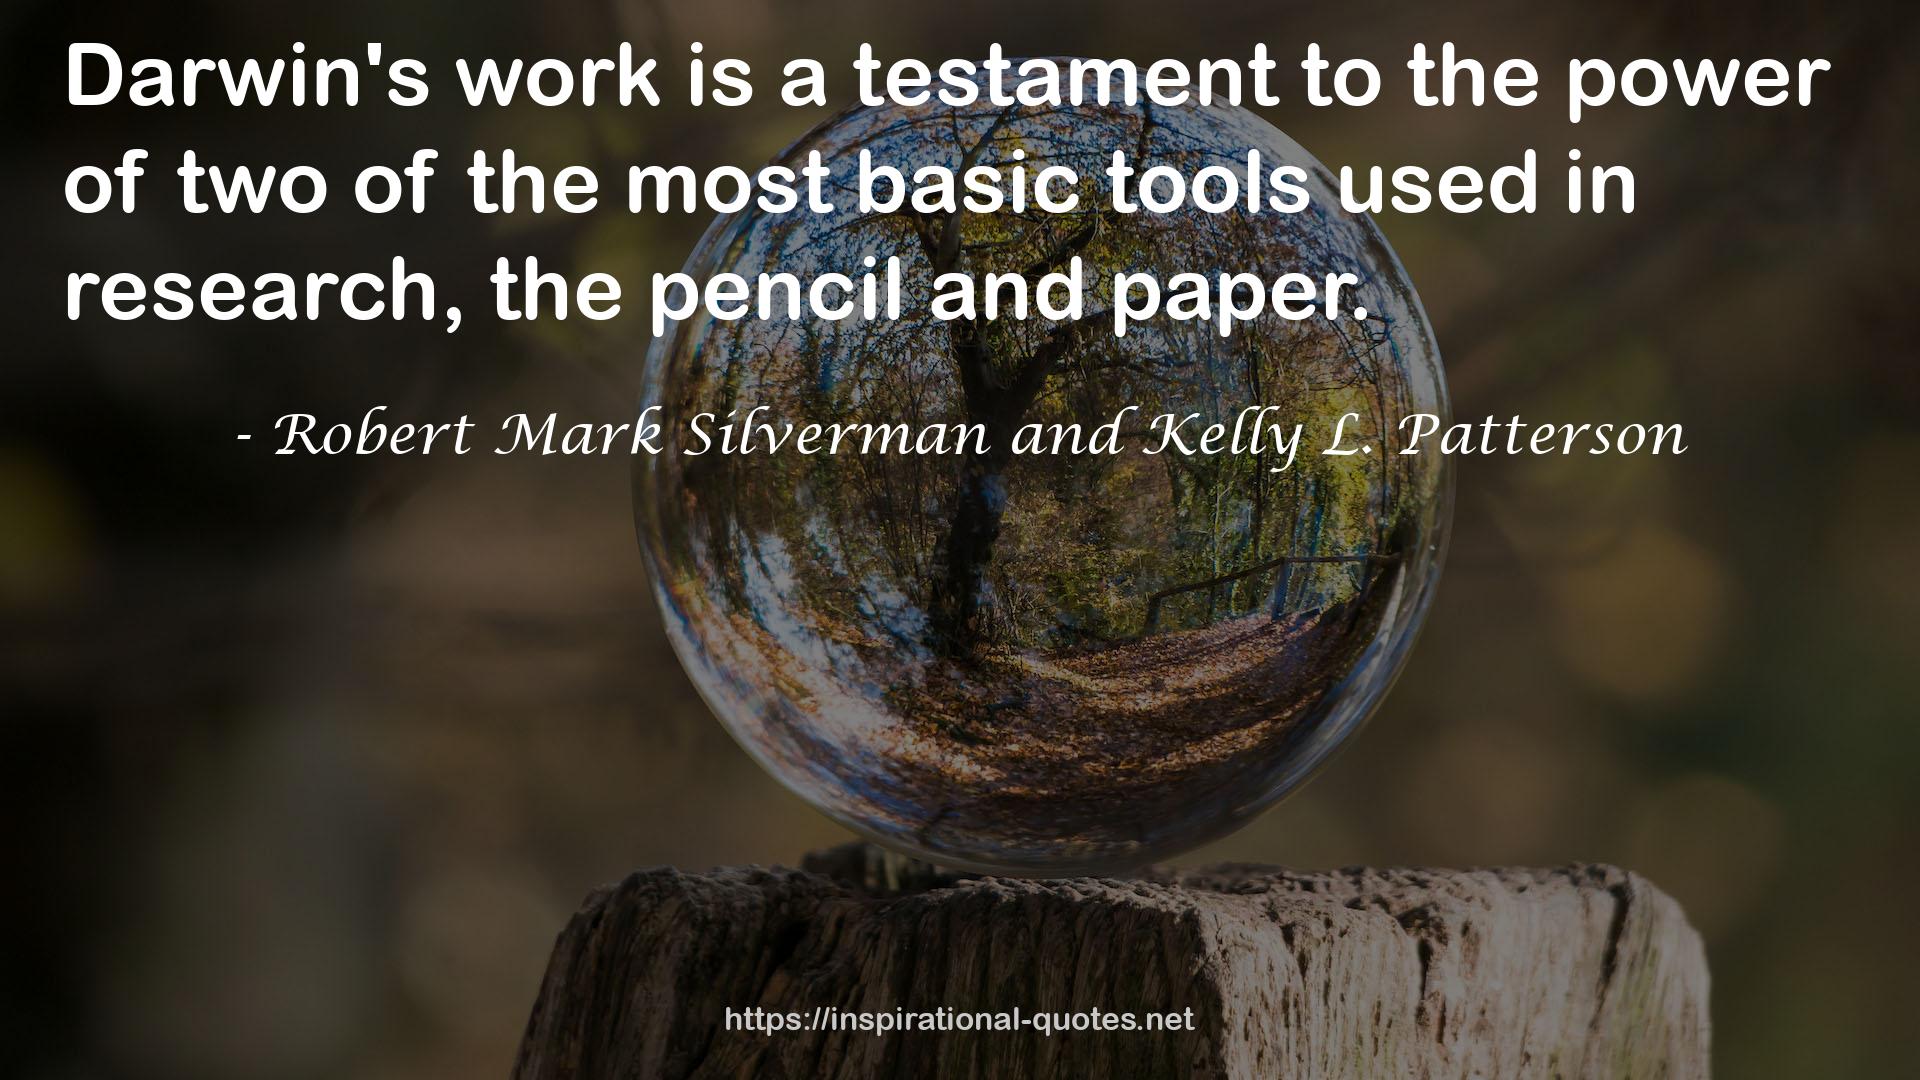 Robert Mark Silverman and Kelly L. Patterson QUOTES